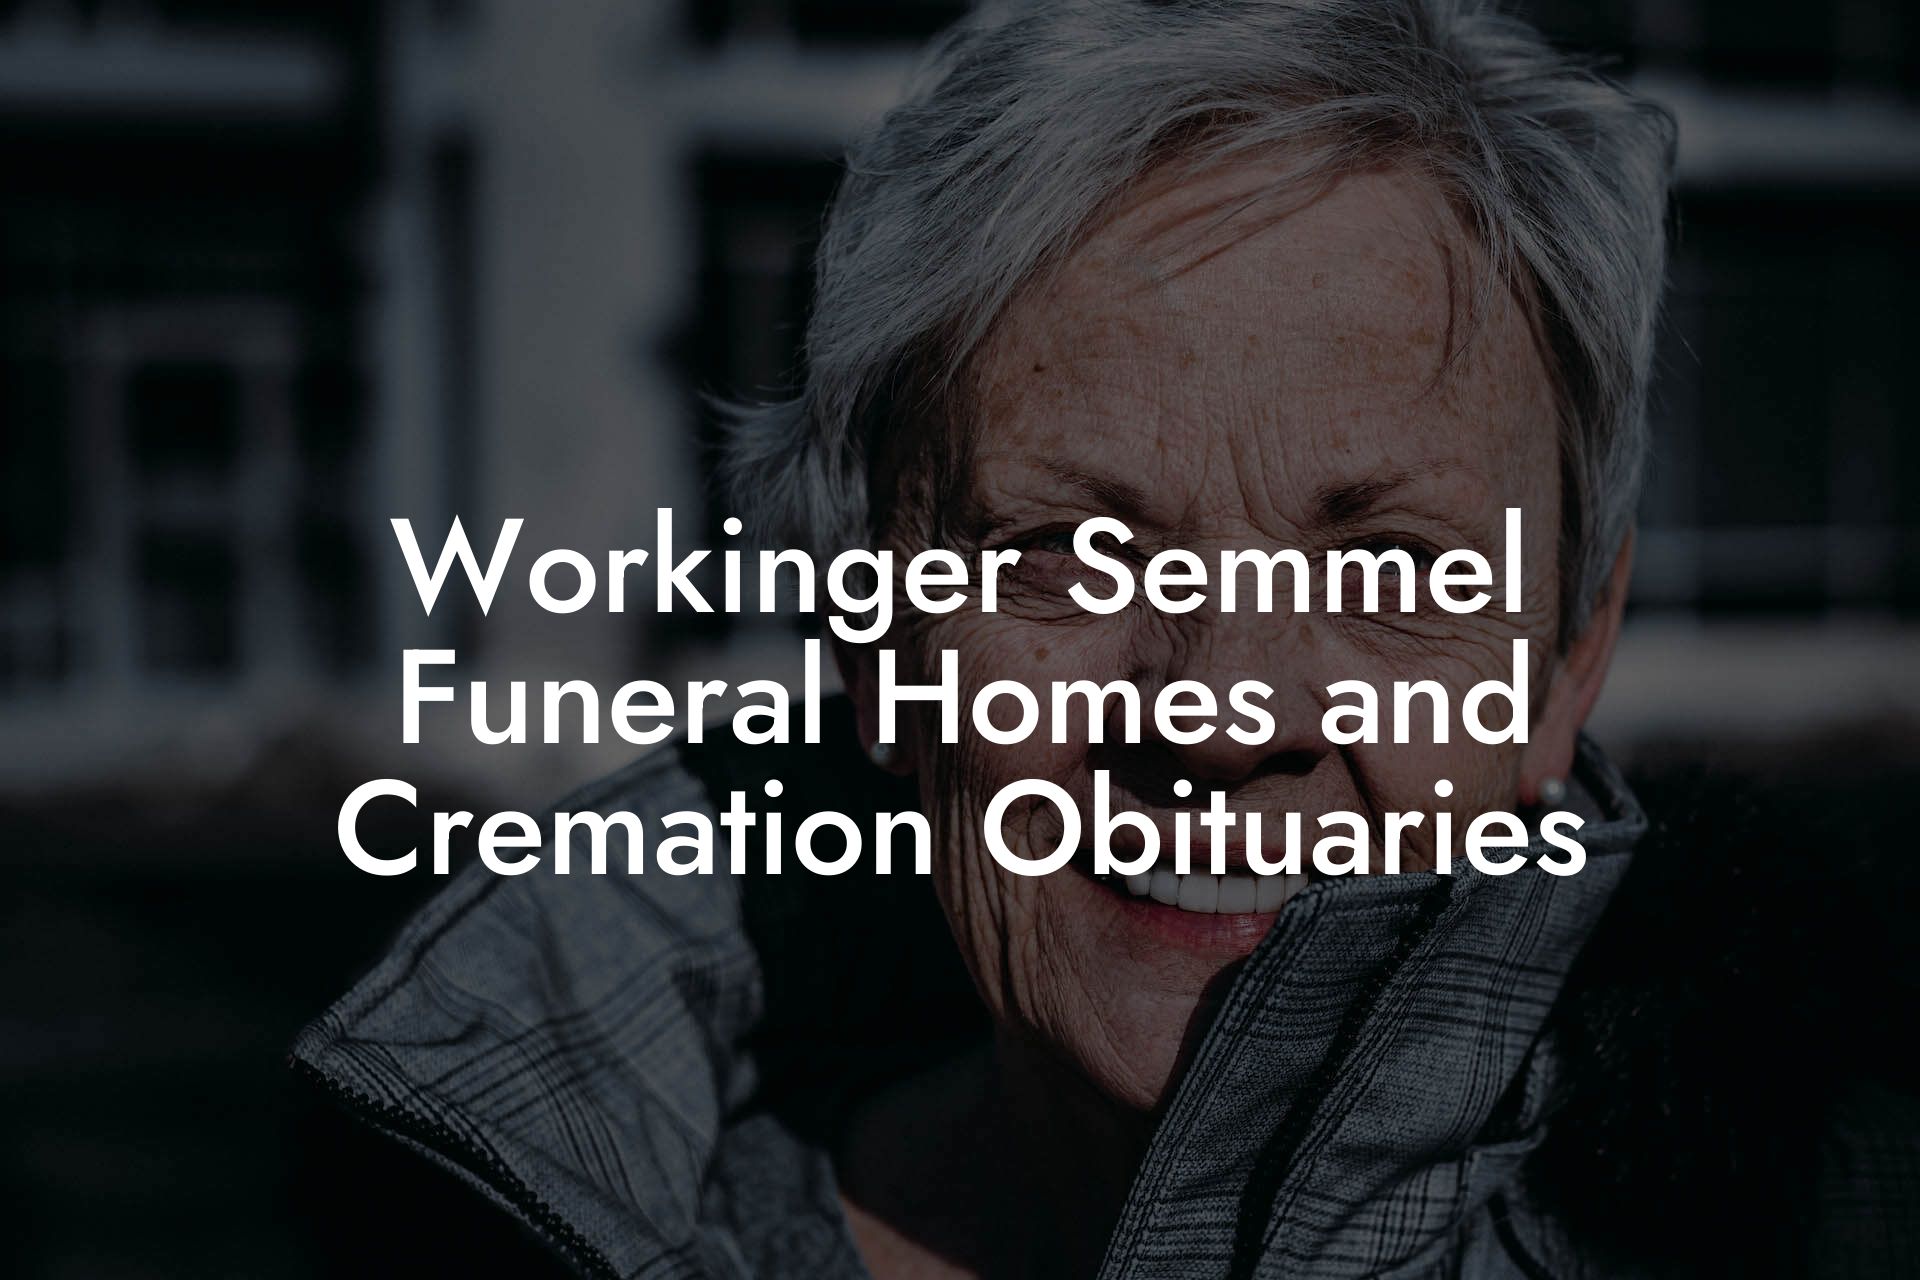 Workinger Semmel Funeral Homes and Cremation Obituaries